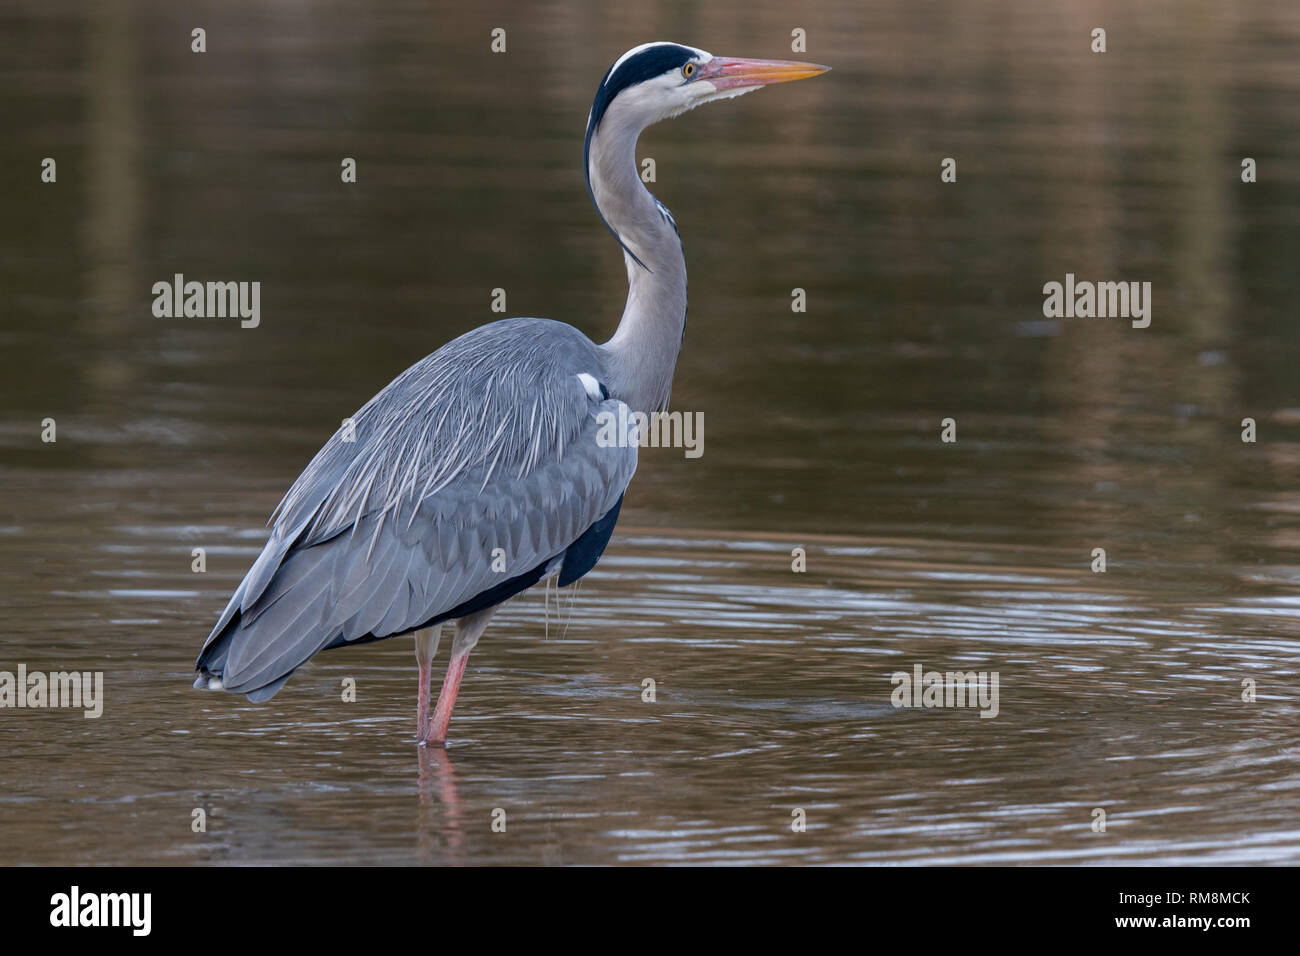 Heron at Priory Country Park, Bedford, England Stock Photo